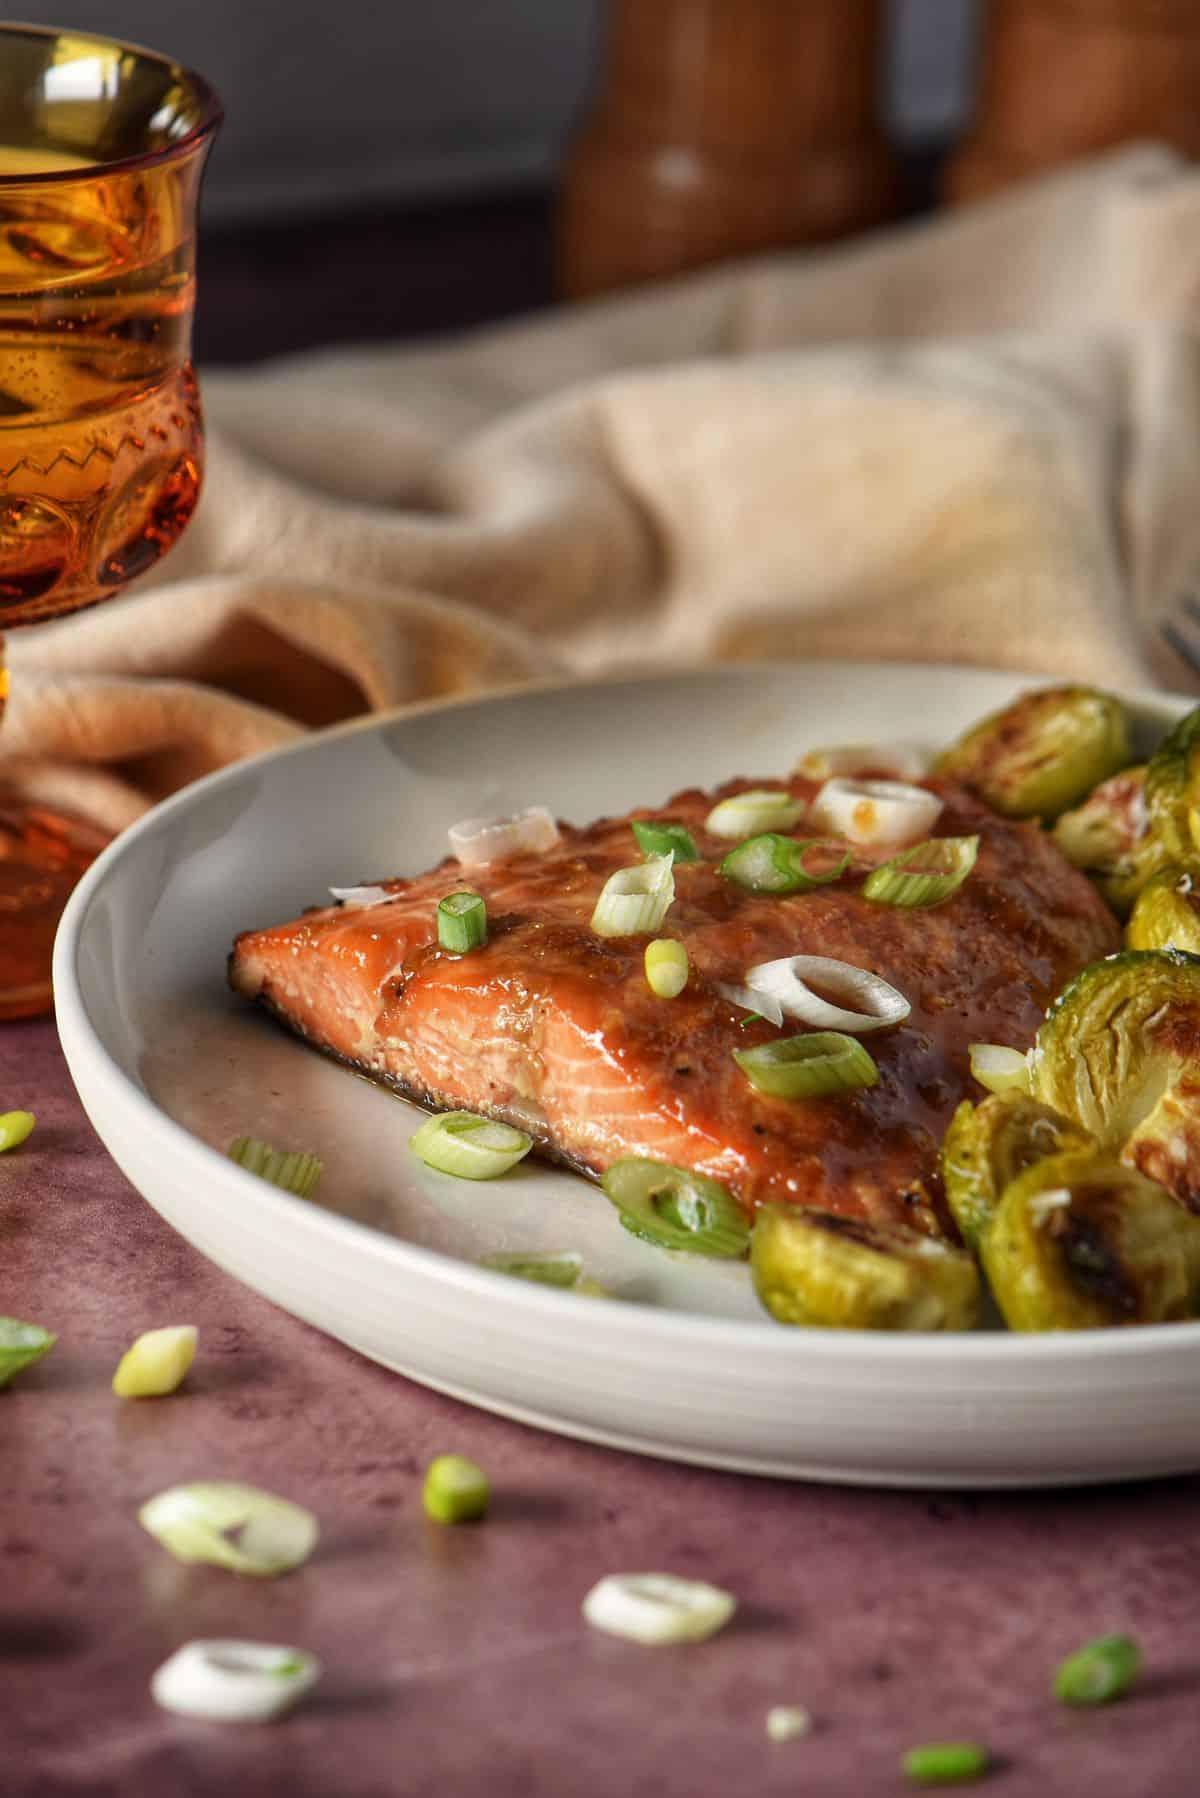 Baked salmon and garlic roasted brussels sprouts on a white dinner plate with a glass of white wine in the background.